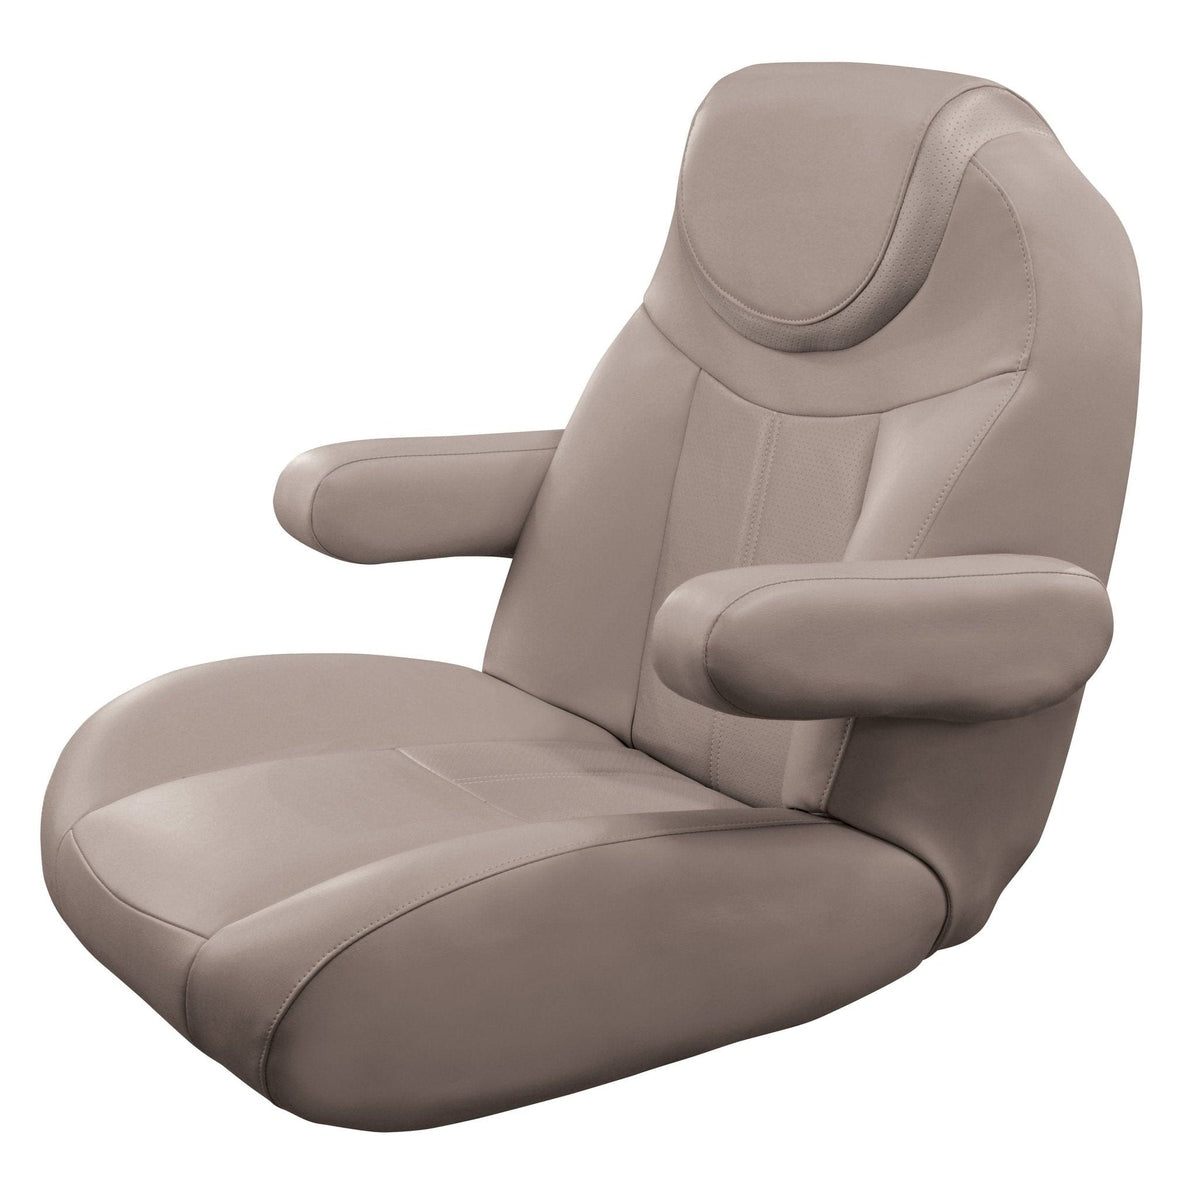 Wise Oversized - Not Qualified for Free Shipping Wise Tellico Reclining Bucket Seat/Mocha #3125-1725